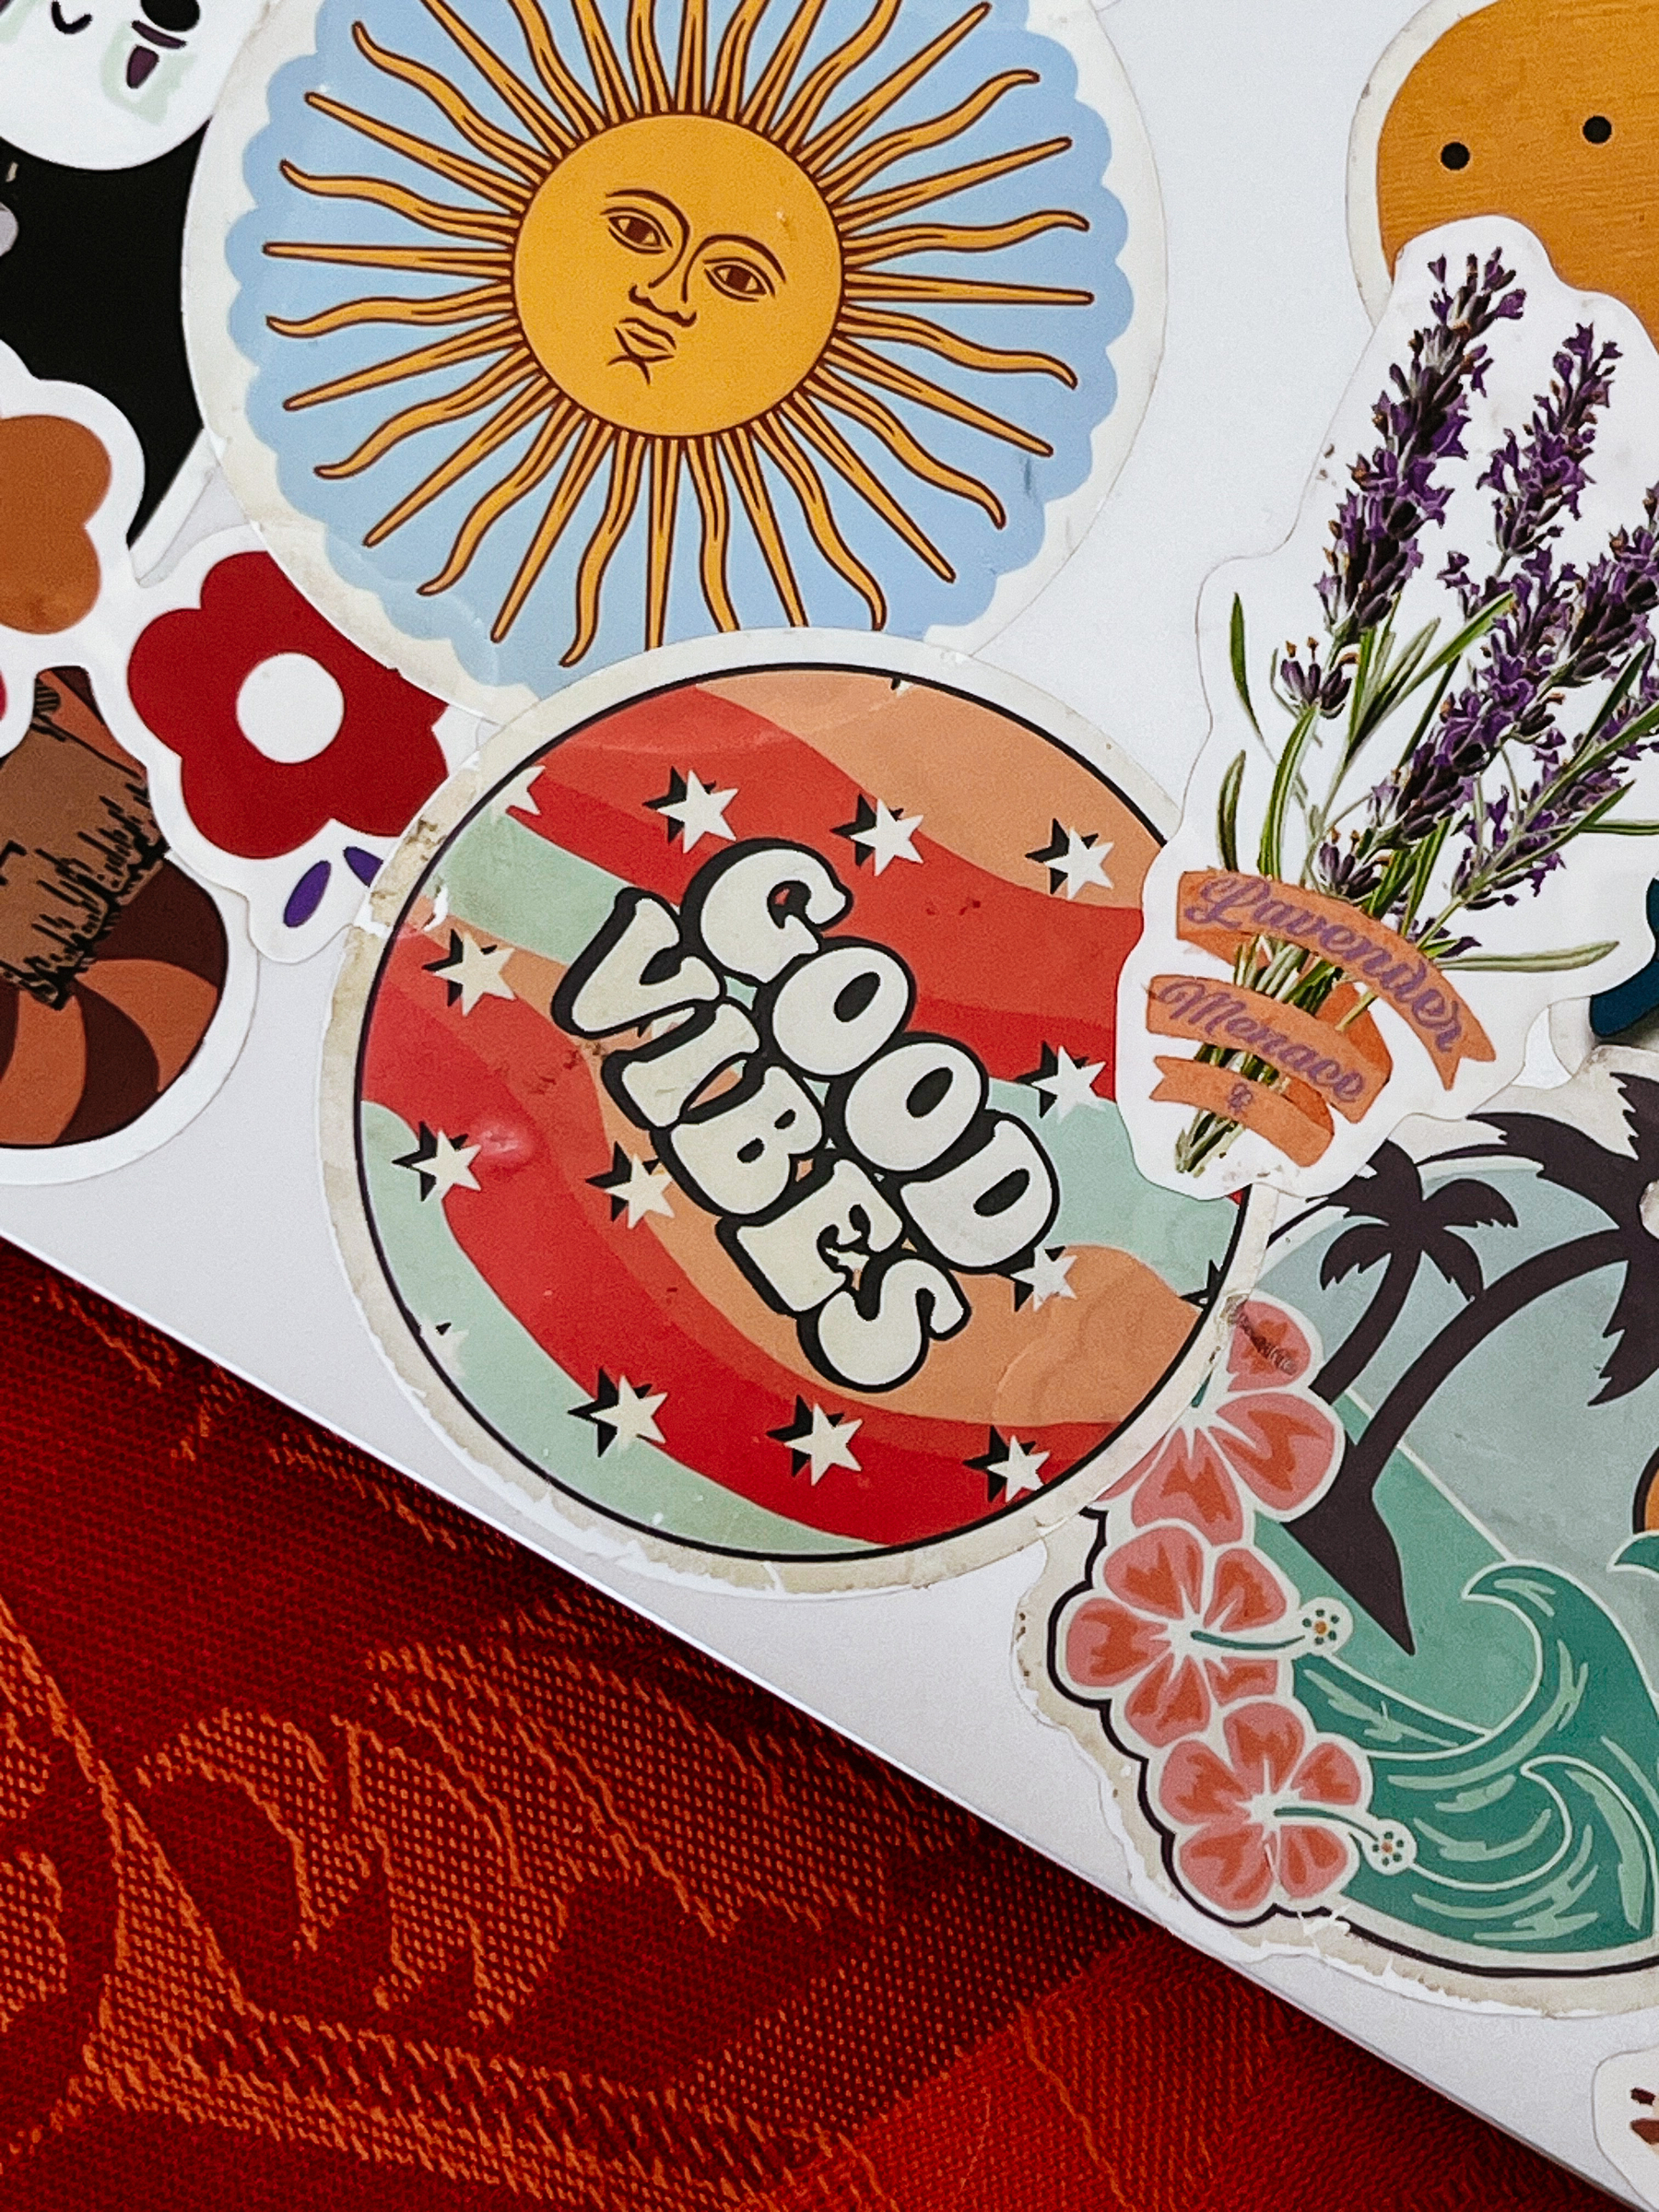 Stickers on a laptop. A sun, one with “Good Vibes” written on it, and “Lavender Menace”. 